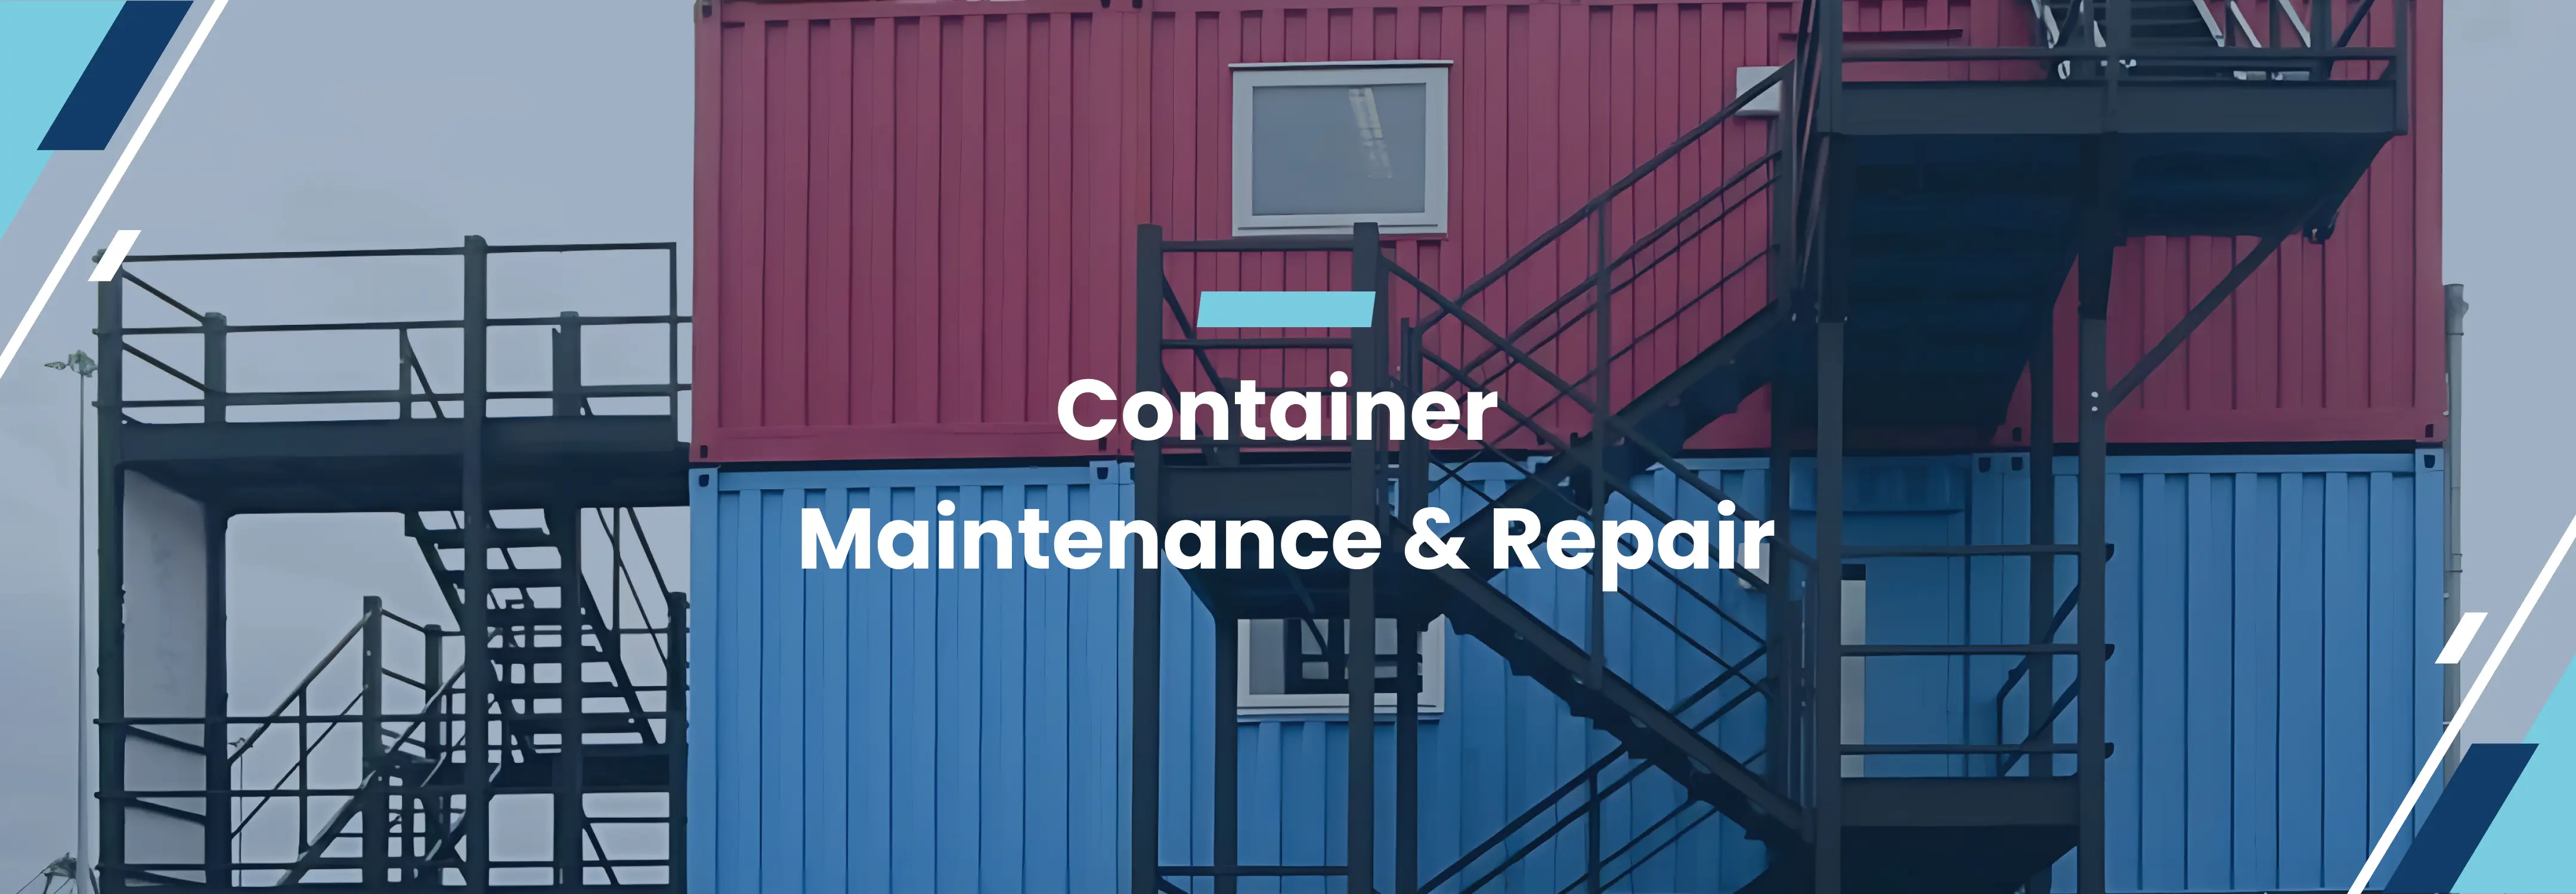 Maintenance Containers from Sree Logistics